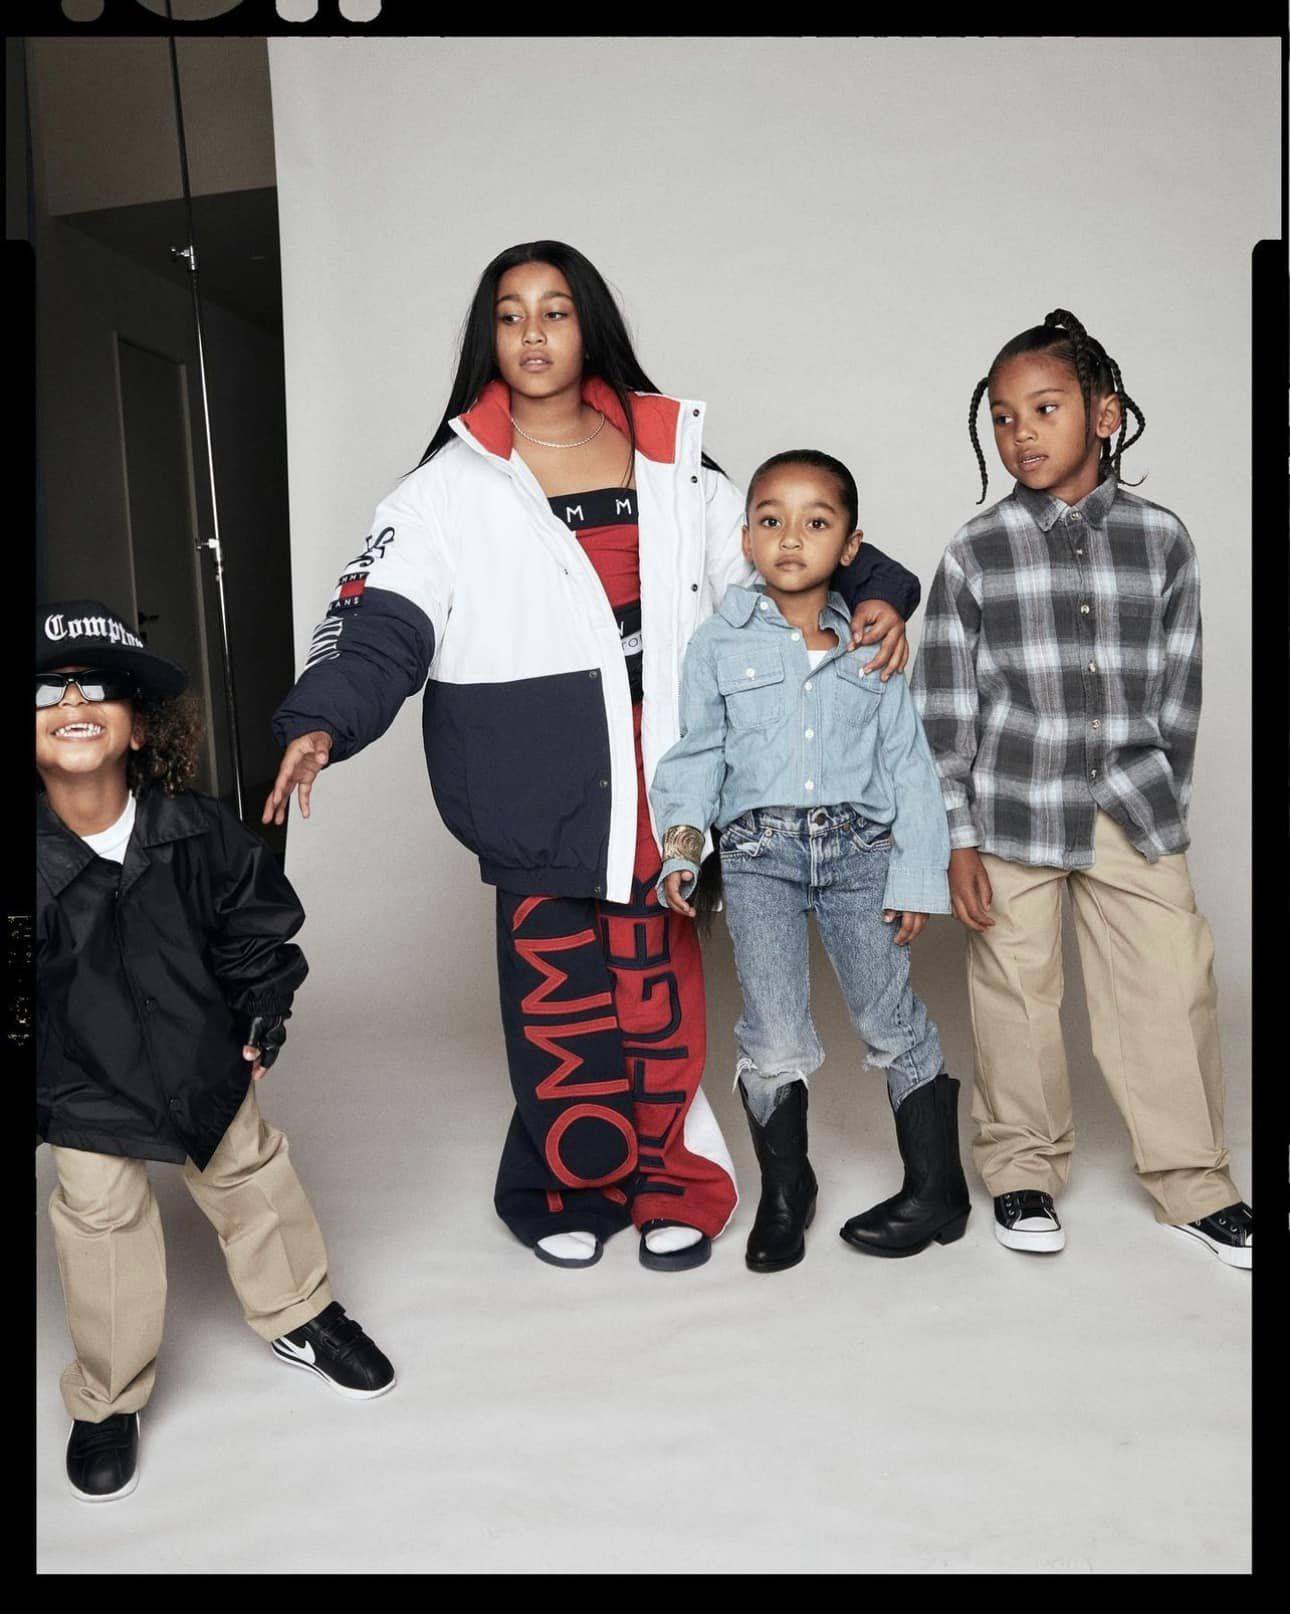 likhoa sweet chicago west next to kim kardashian and her siblings in a family photo set that makes the online community constantly praise 6539def75cfeb Sweet Chicago West Next To Kim Kardashian And Her Siblings In A Family Photo Set That Makes The Online Community Constantly Praise